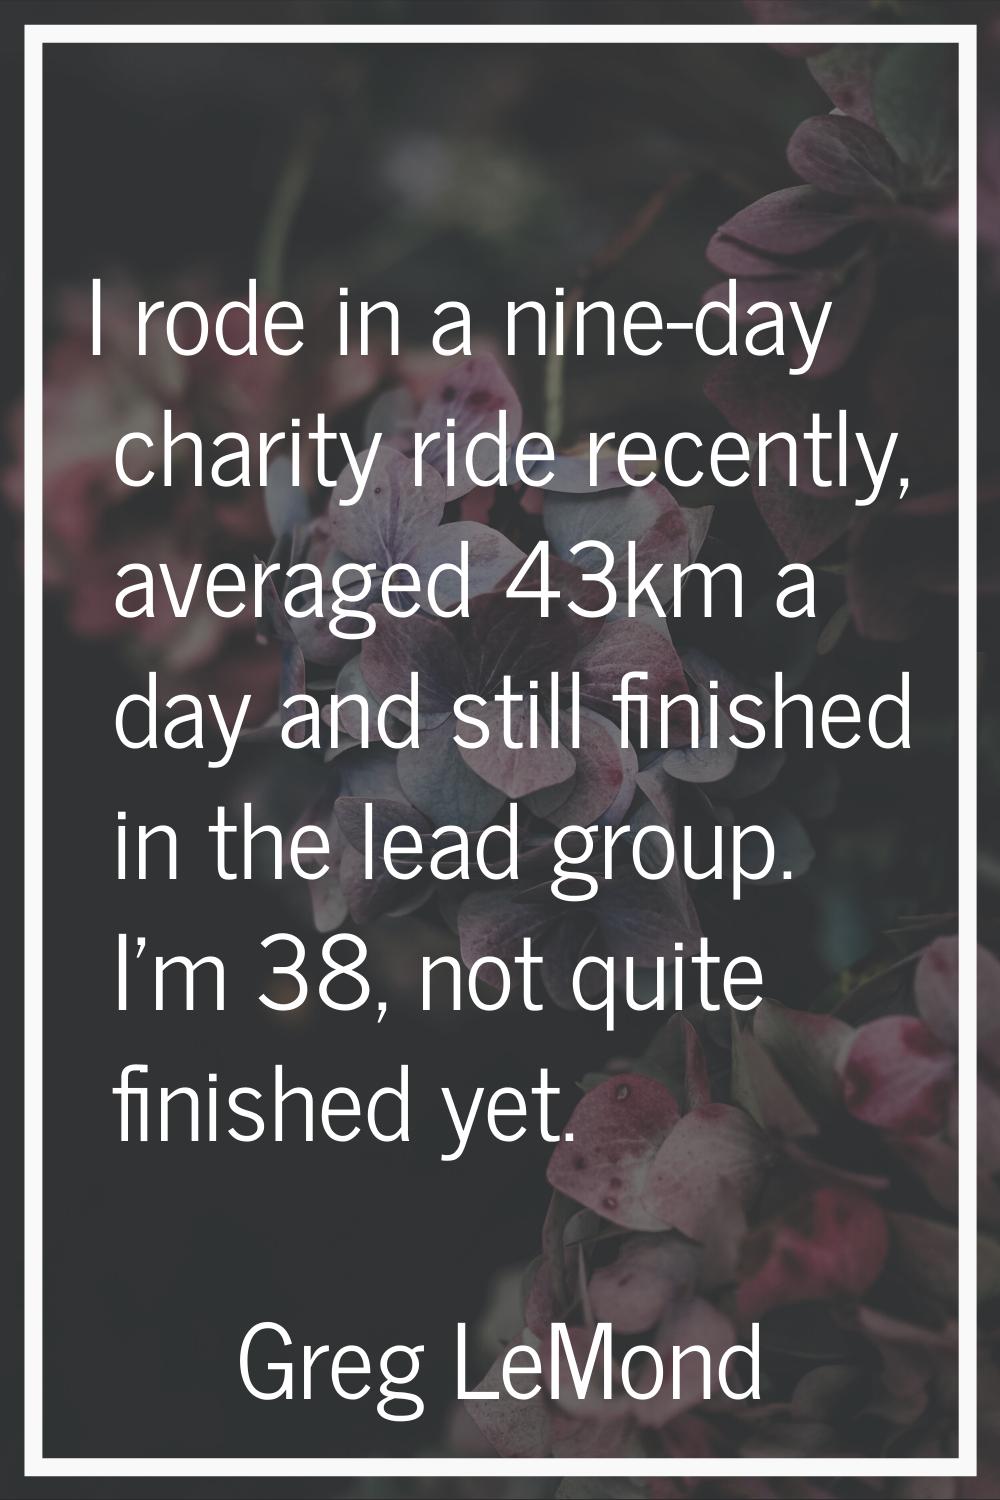 I rode in a nine-day charity ride recently, averaged 43km a day and still finished in the lead grou